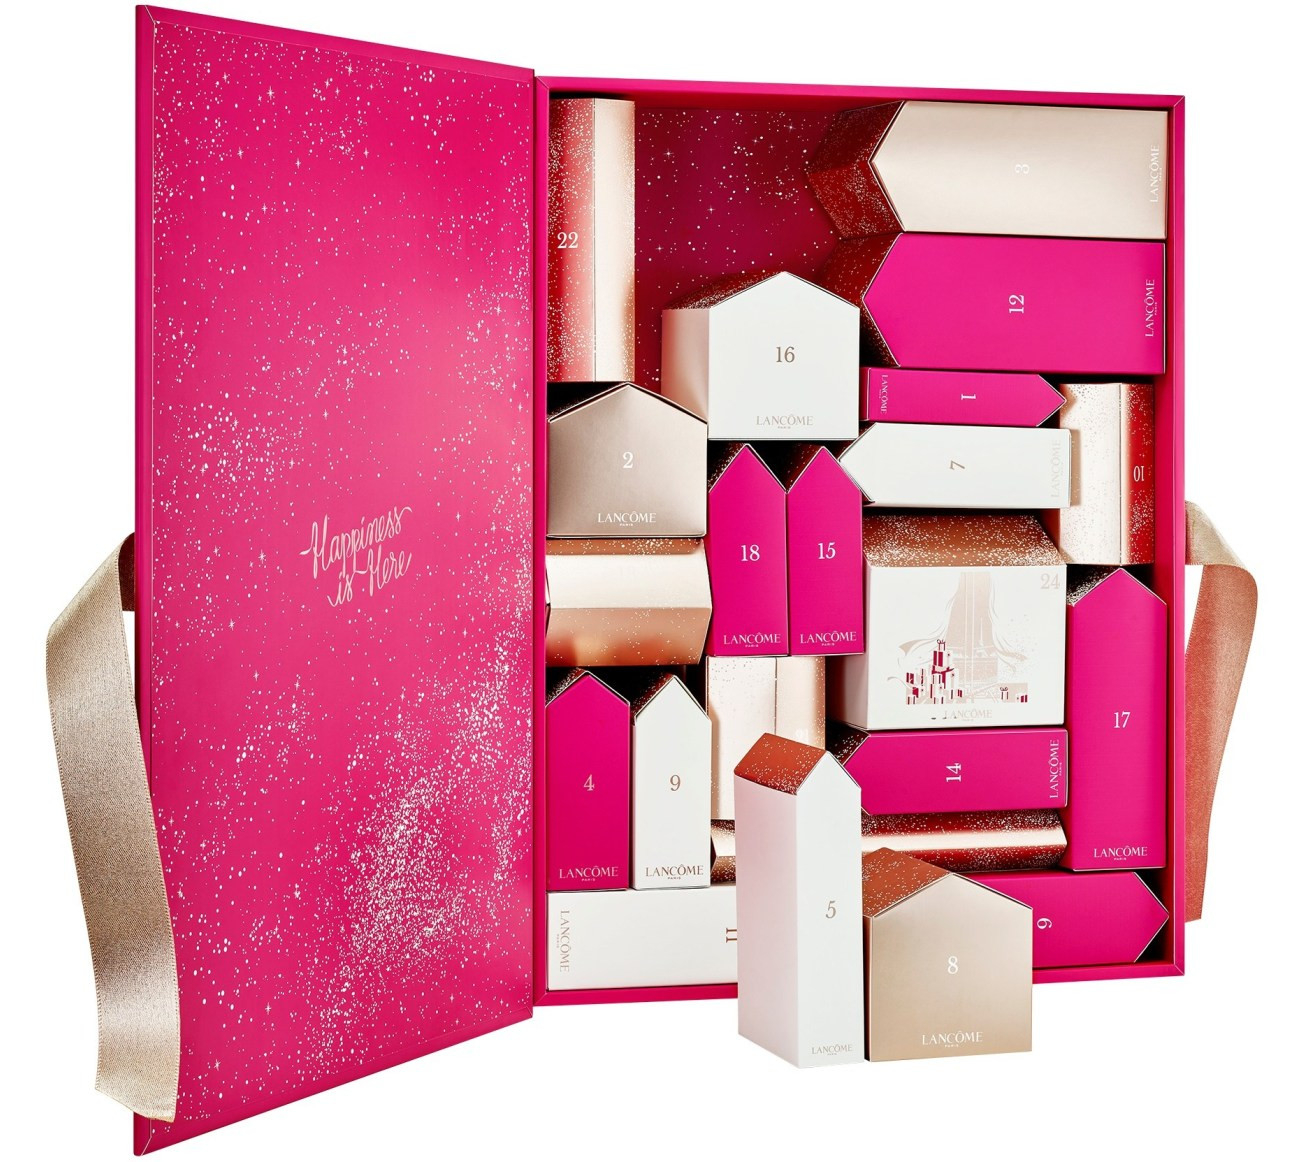 Lancome Boots Advent Calendar 2019 - Beauty Markdown  Contents Of Chanel Advent Calendar